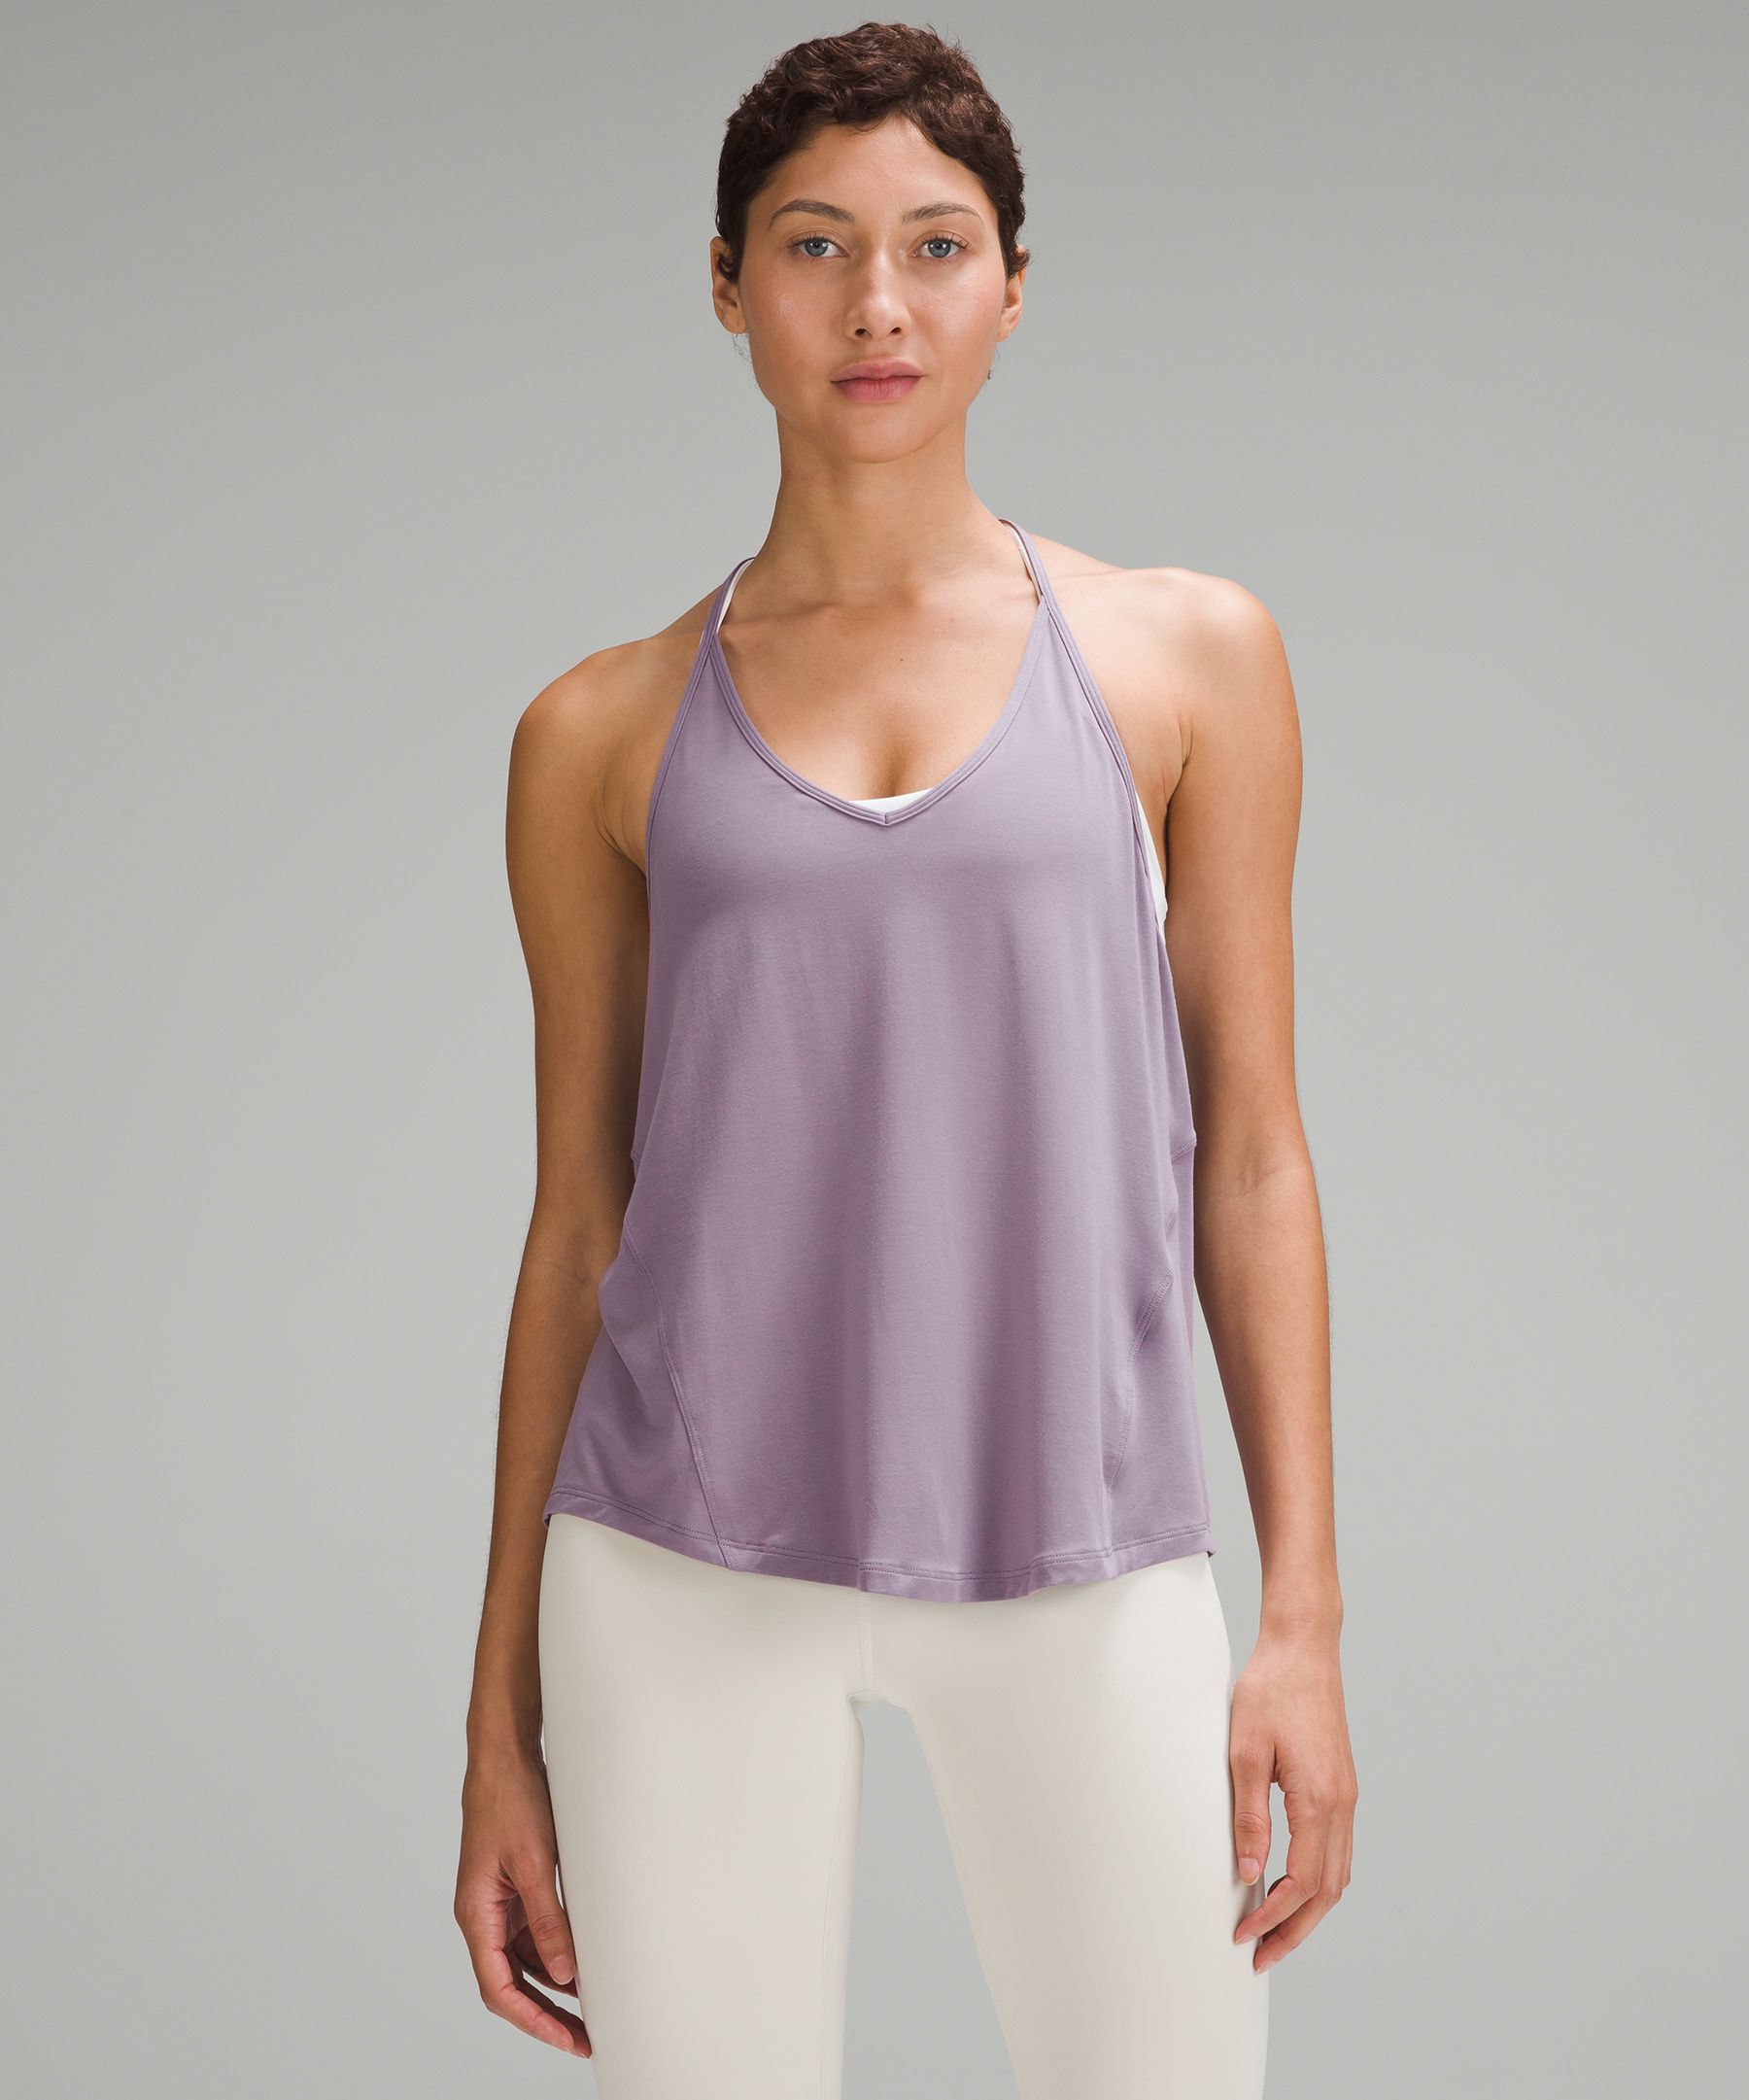 Lululemon Canada Pre Black Friday We Made Too Much Sales: Get Modal-Silk  Yoga Tank Top for $24 + FREE Shipping! - Canadian Freebies, Coupons, Deals,  Bargains, Flyers, Contests Canada Canadian Freebies, Coupons